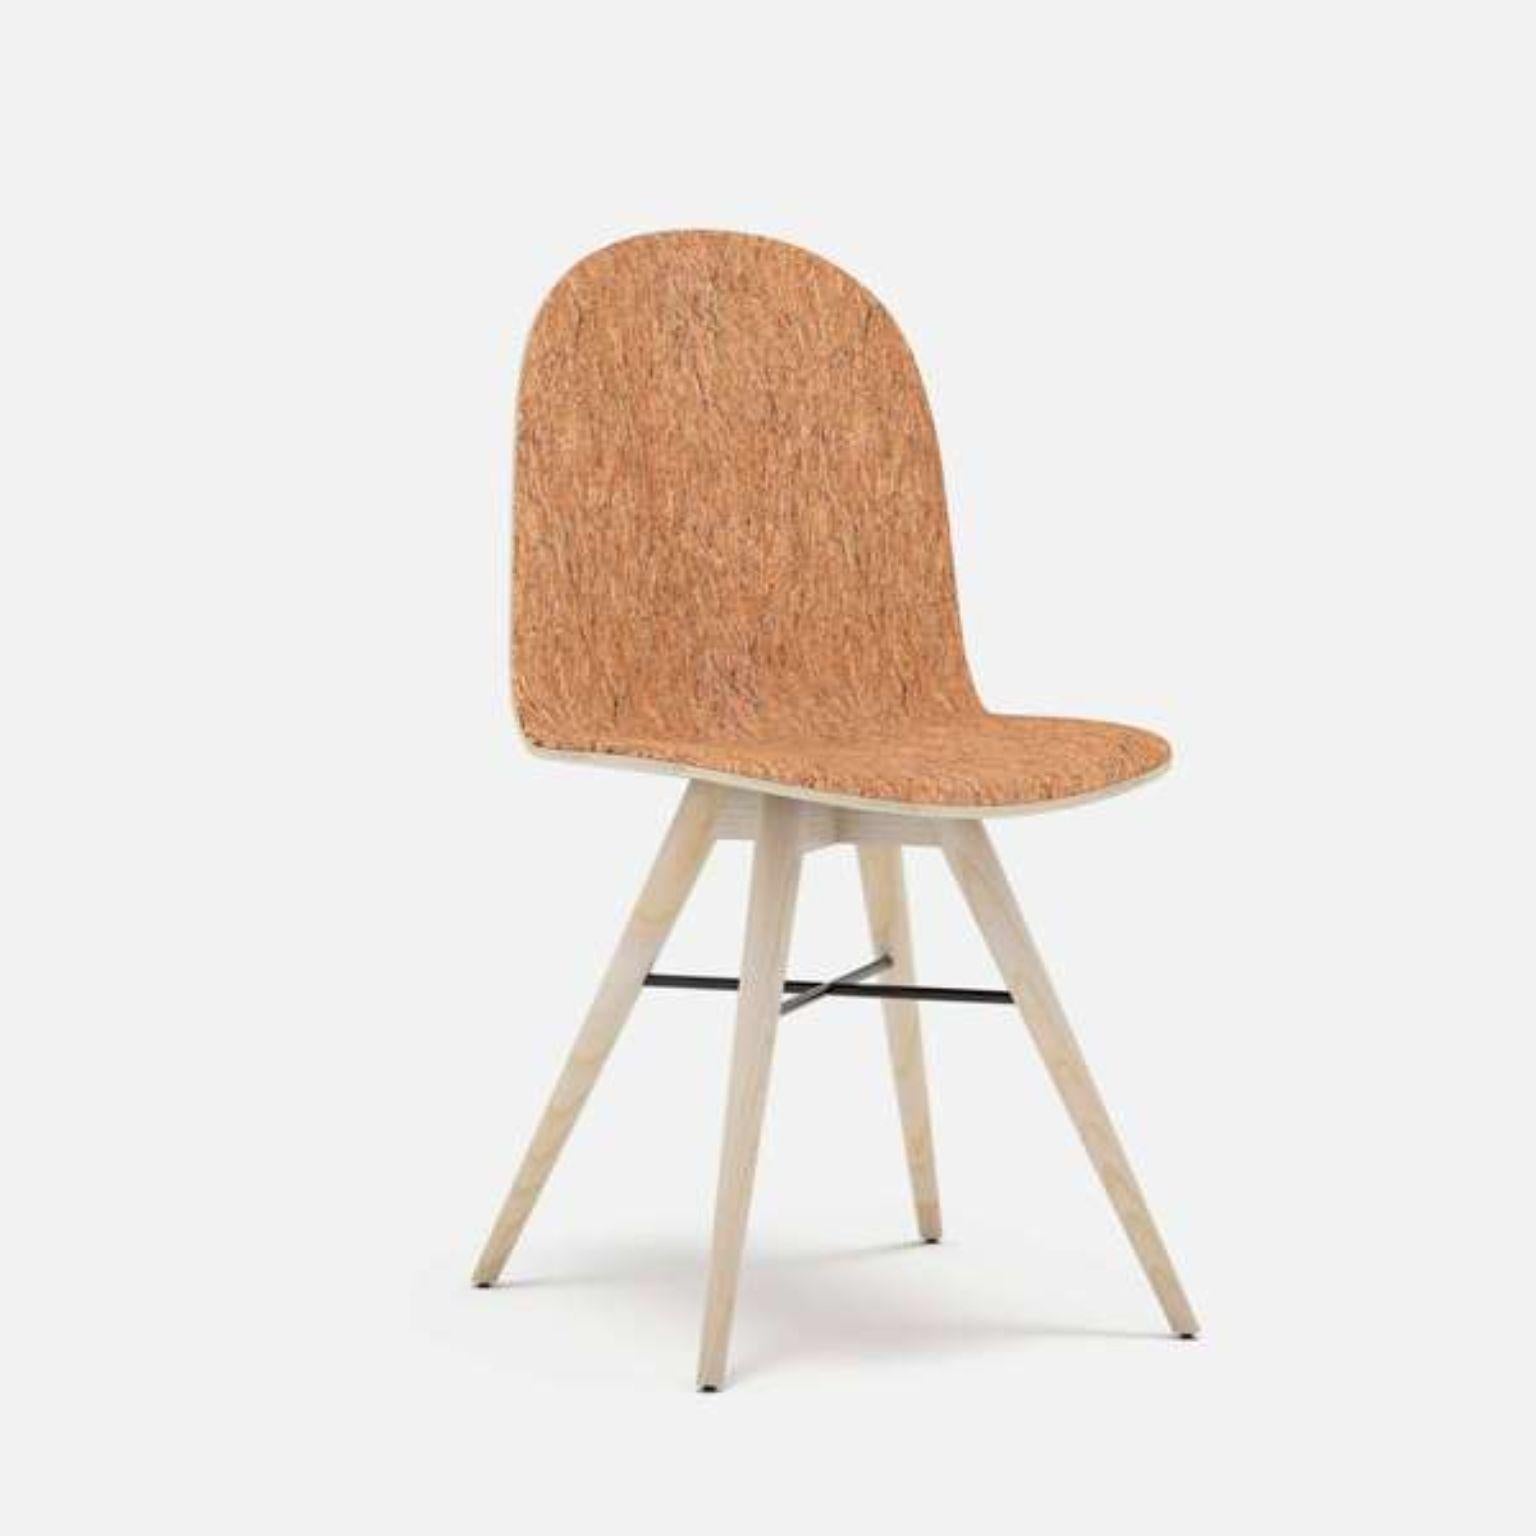 Ash and Corkfabric contemporary chair by Alexandre Caldas
Dimensions: W 40 x D 40 x H 80 cm
Materials: Ash solid wood, corkabric

Structure available in beech, ash, oak, mix wood
Seat available in fabric, leather, corkfabric.


